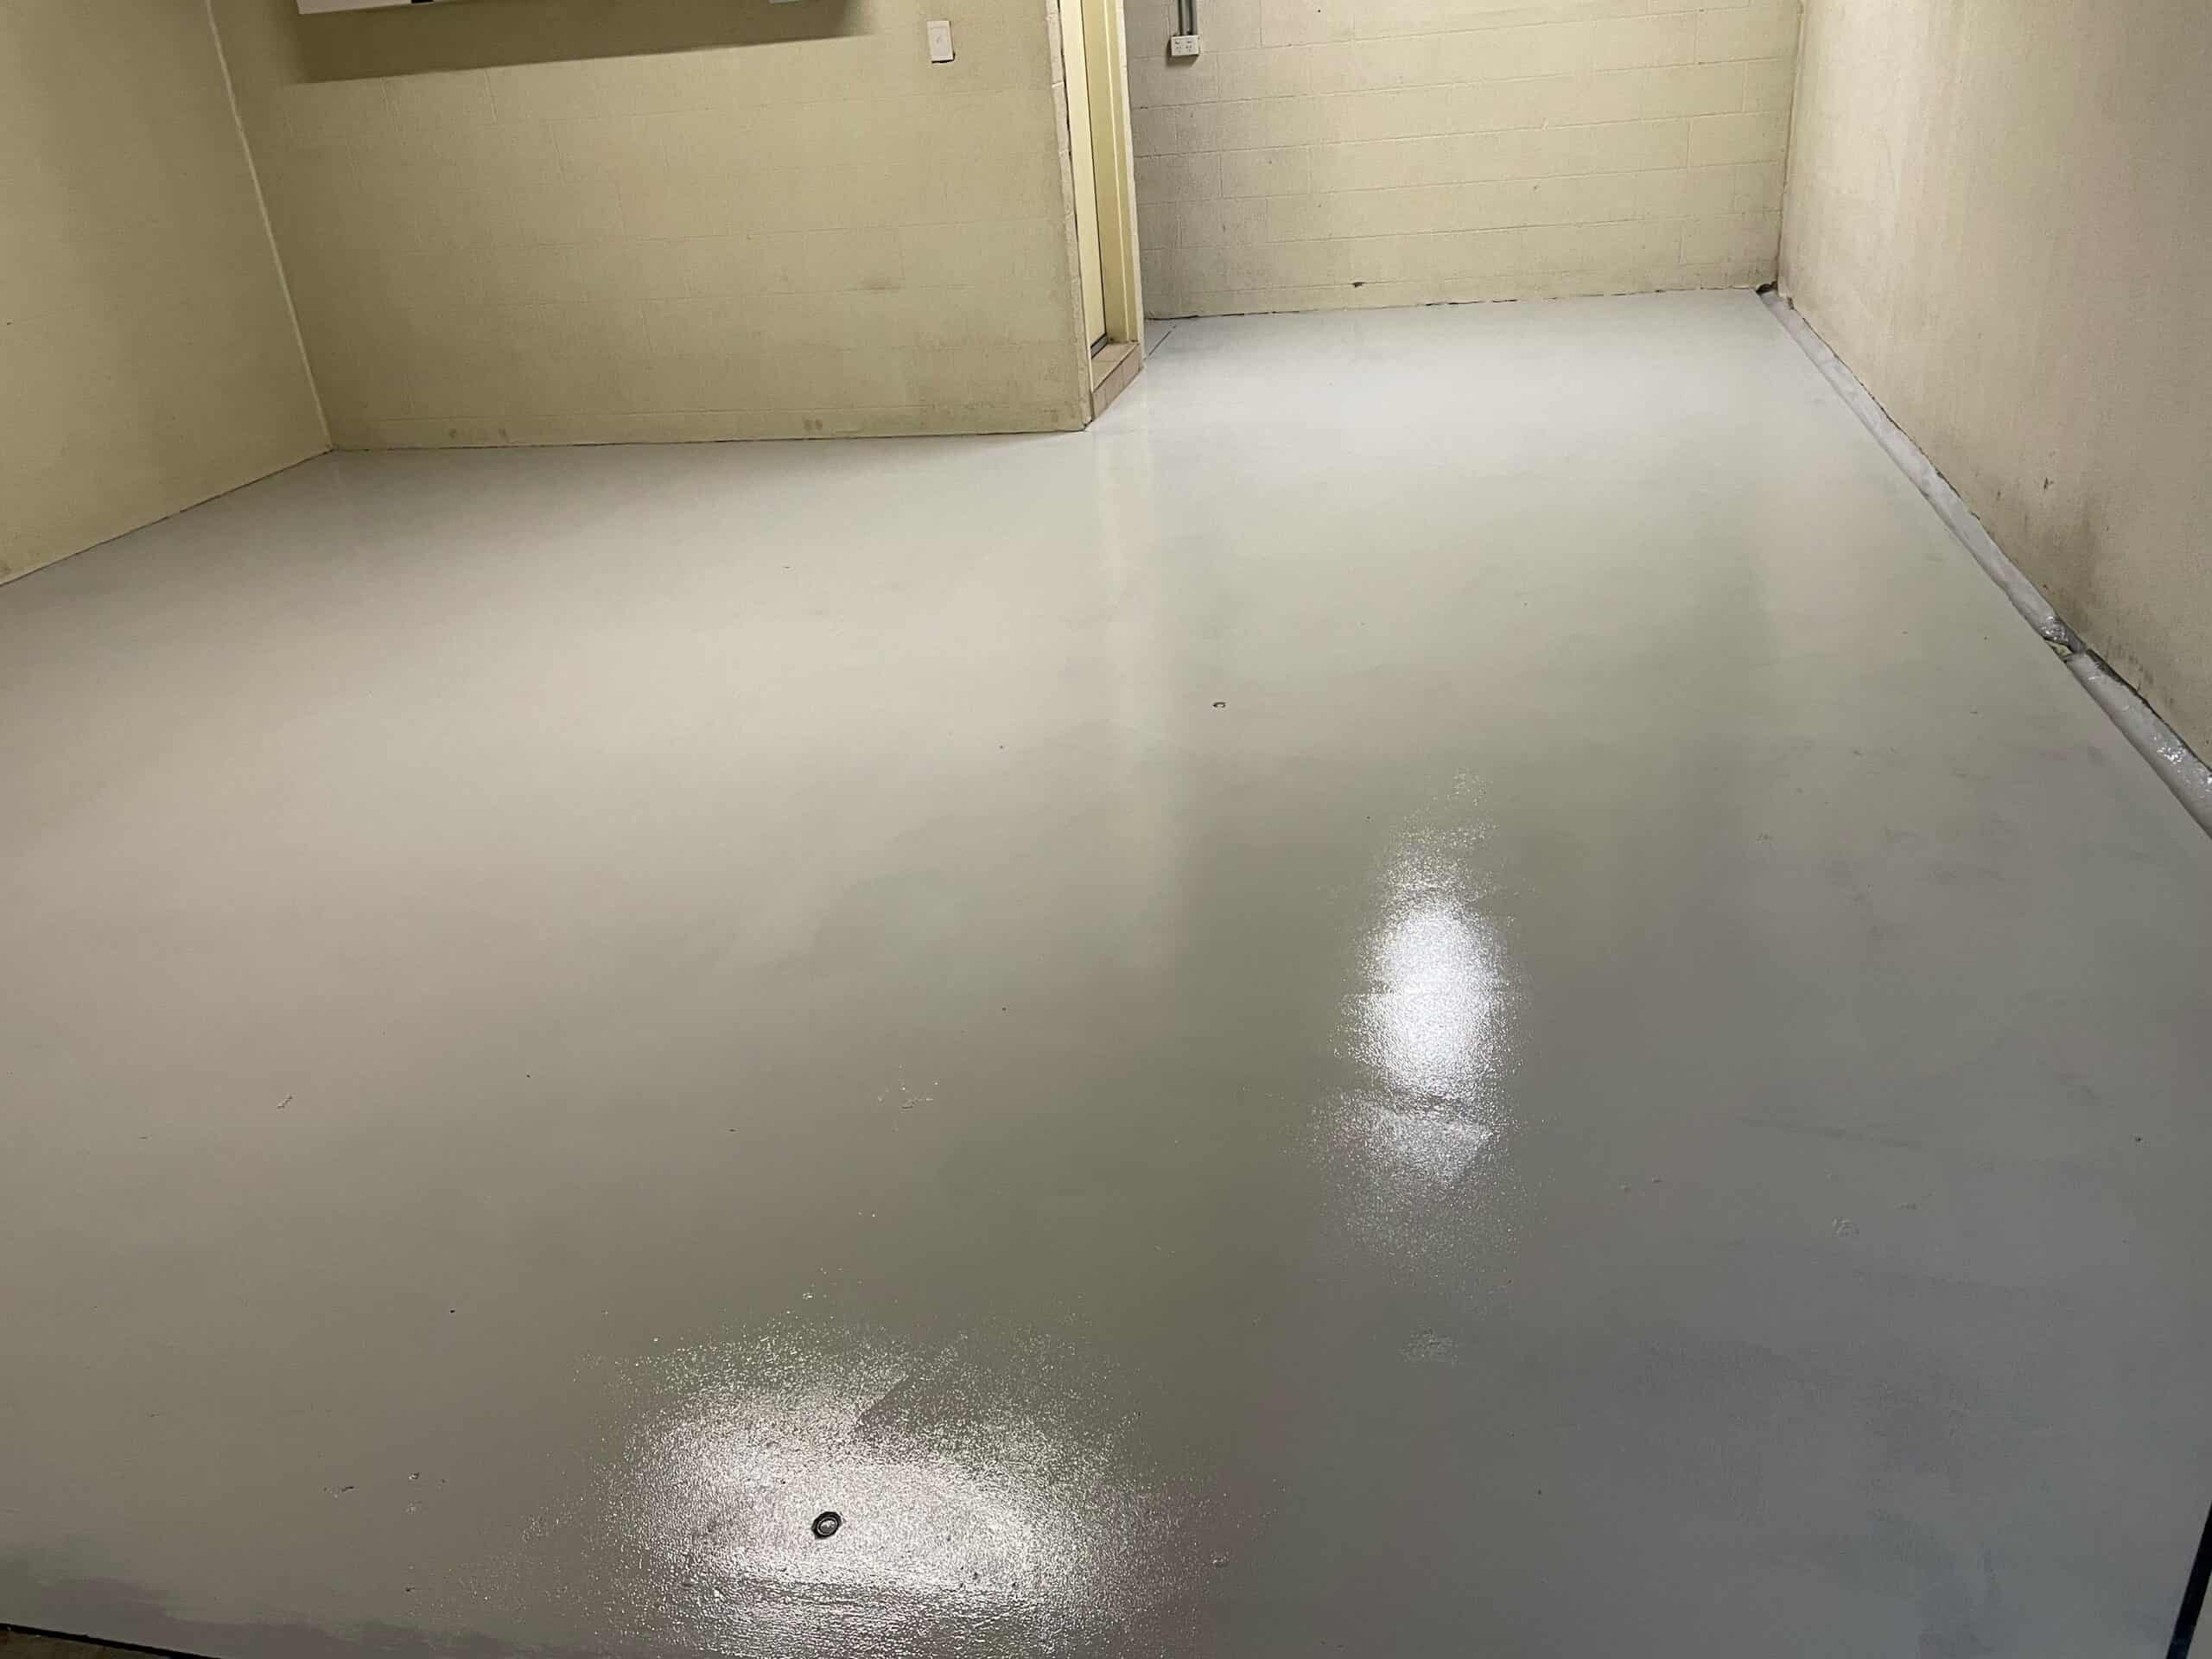 Epoxy flooring for a garage is the Most Durable, Highest Performance Coating